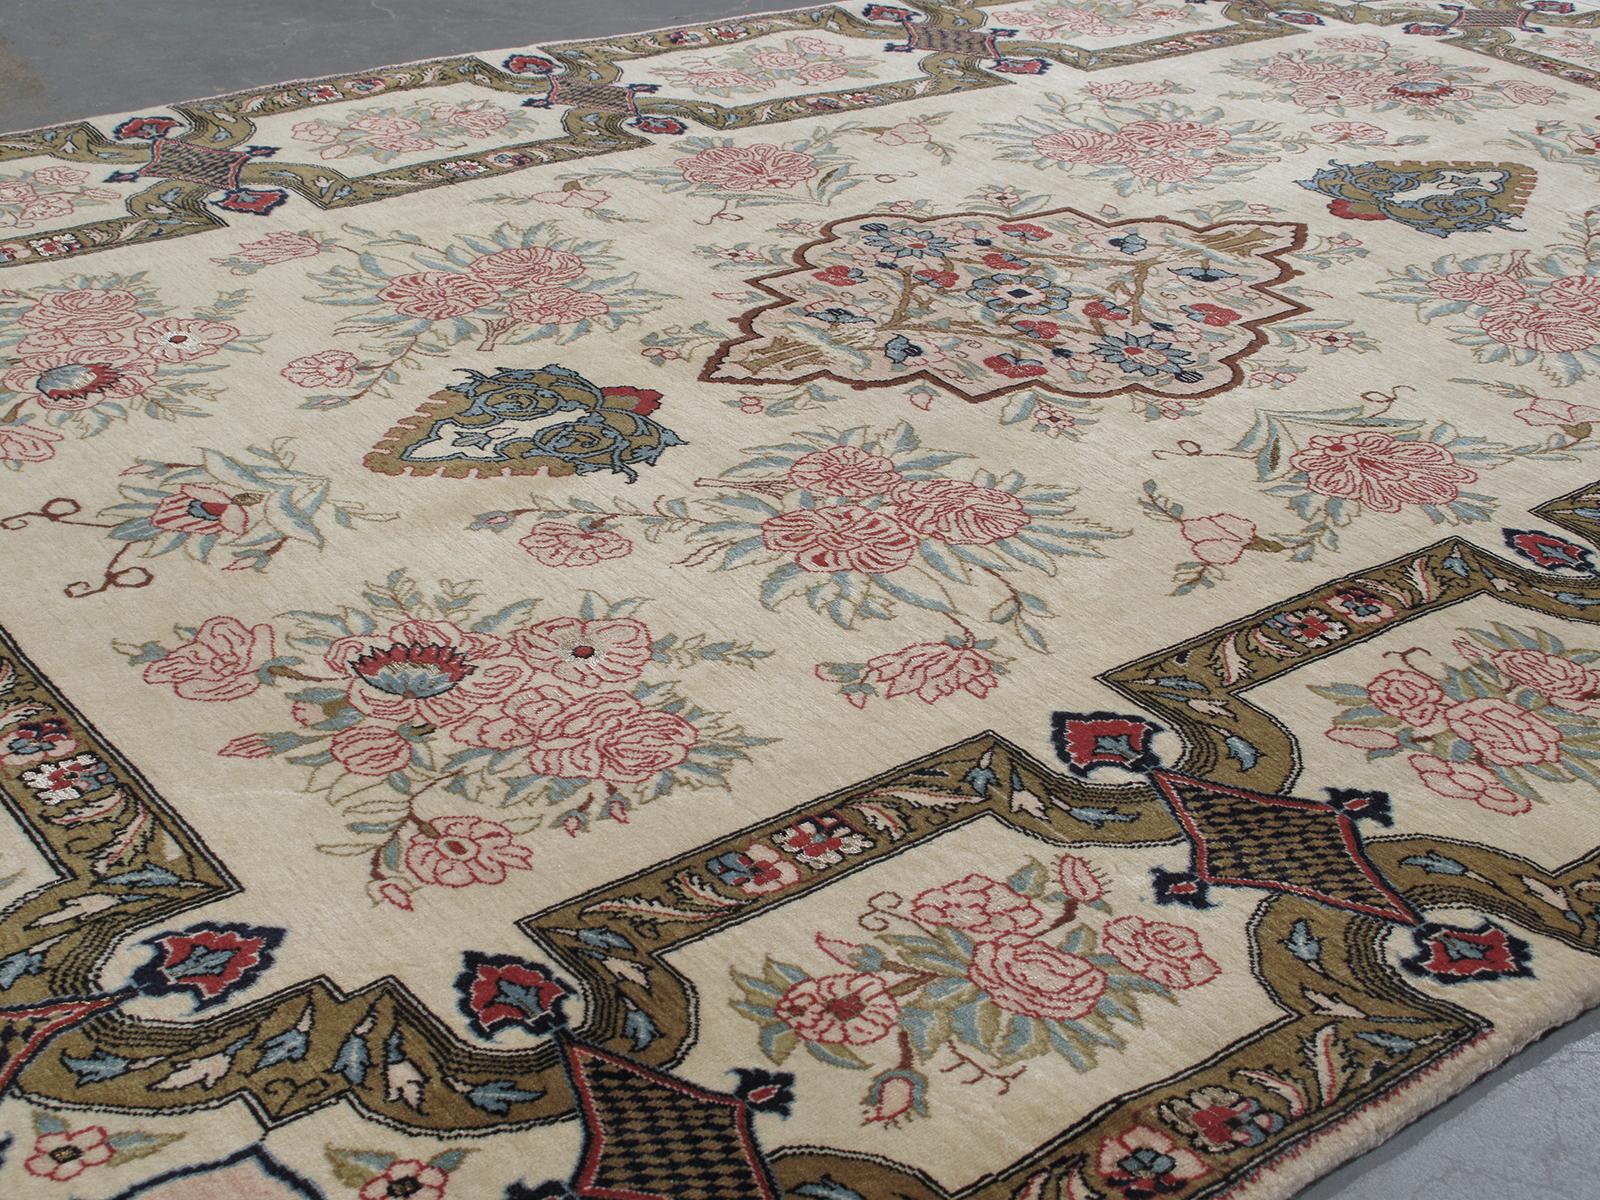 Vintage Persian Qum rug. Hand knotted with 100% wool silk detail. Rug size: 4' 8